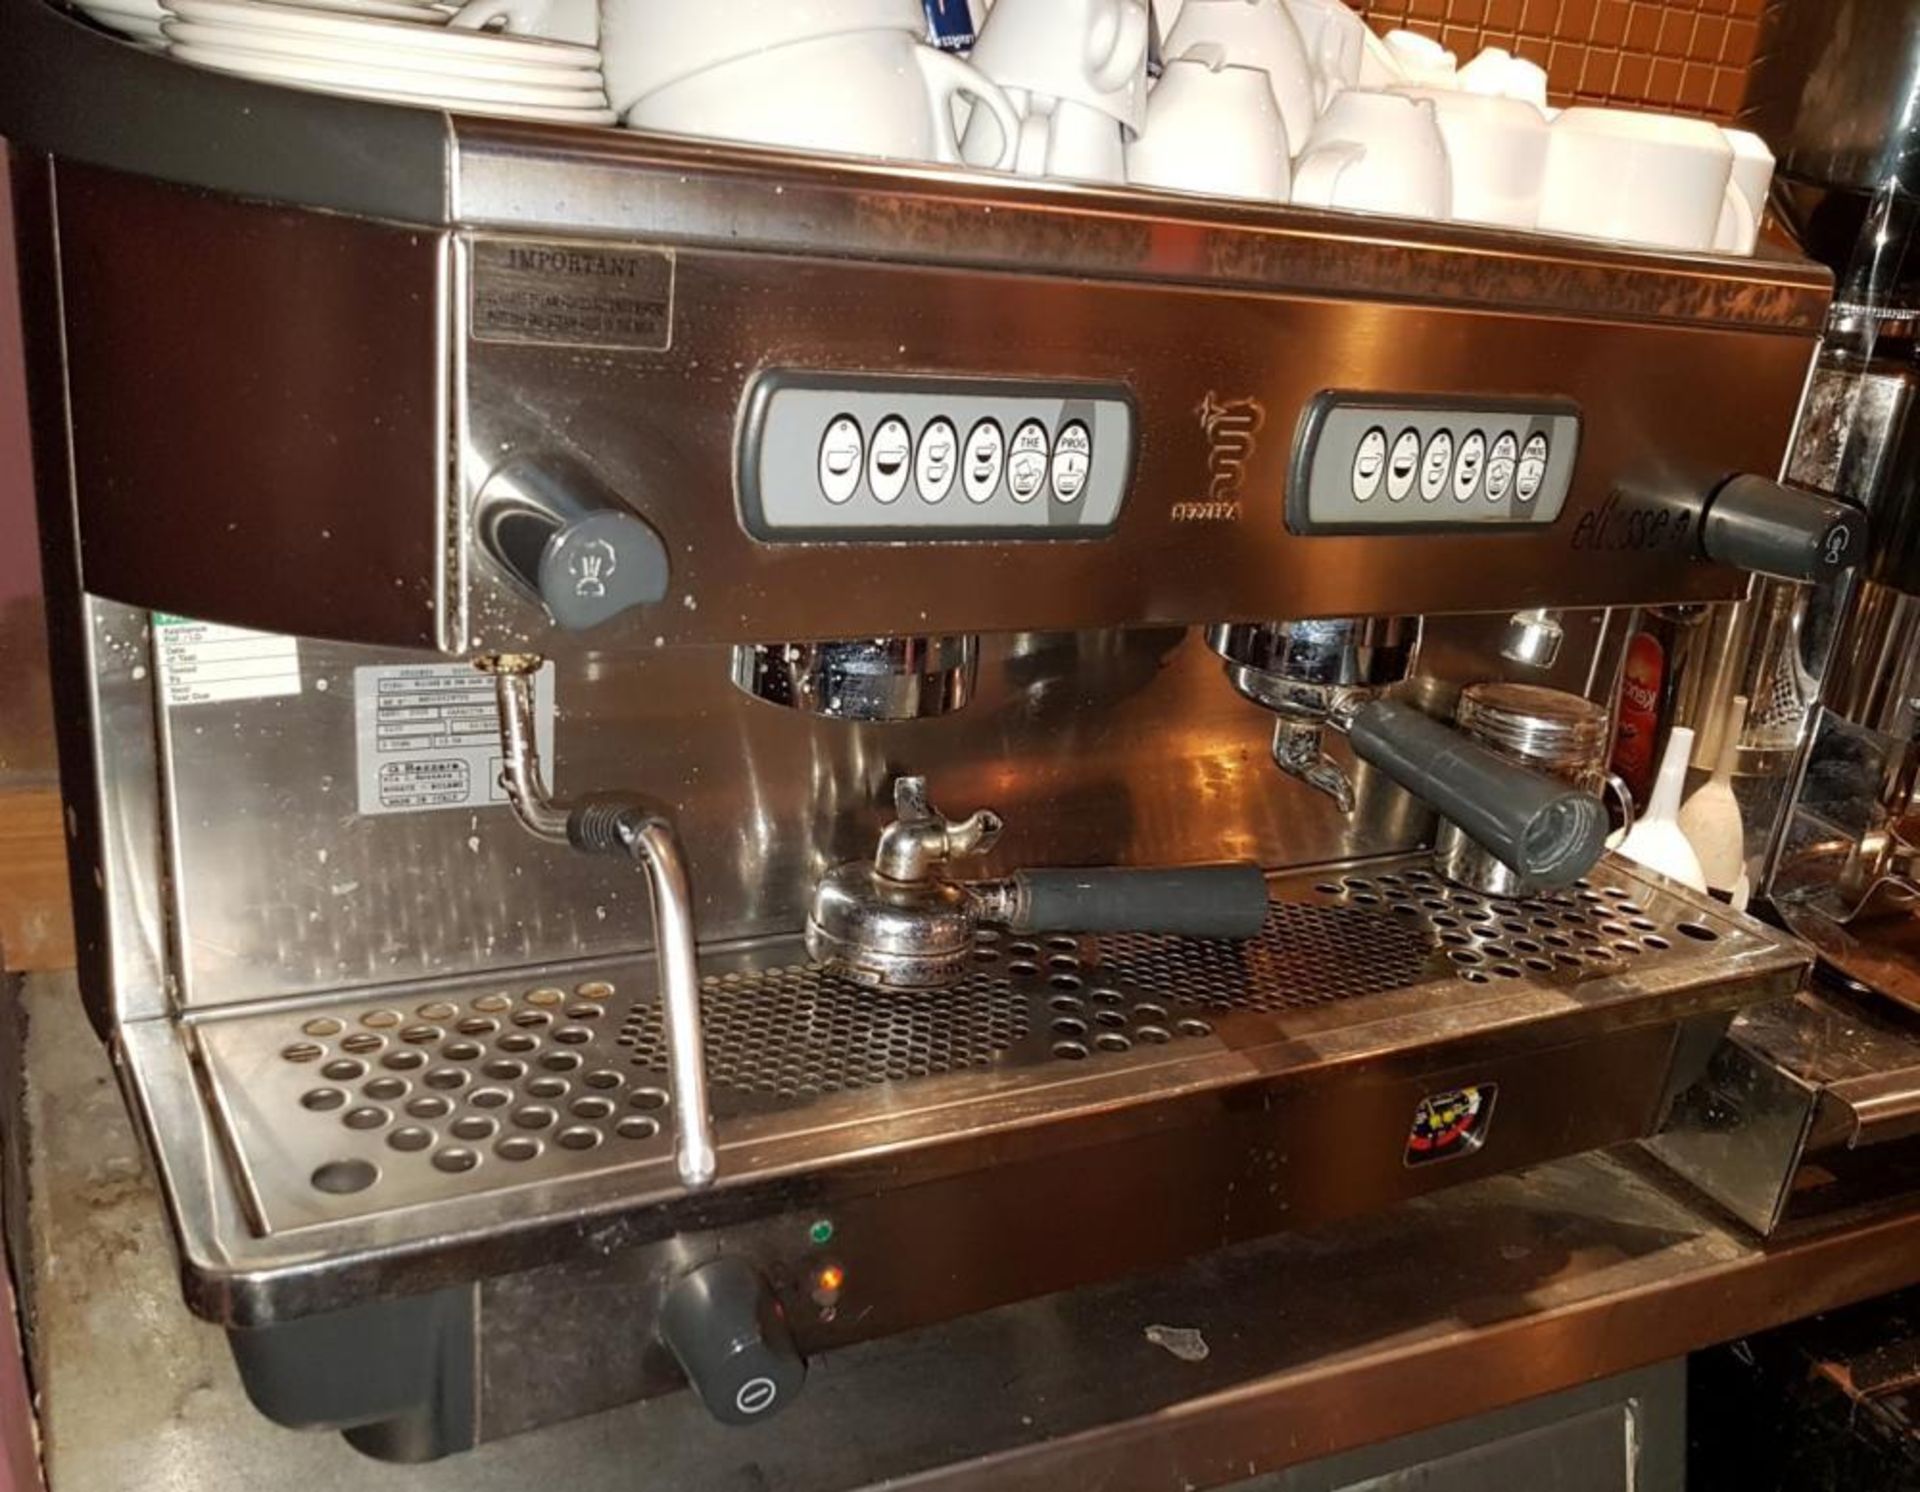 1 x Bezzera Ellisse DE 2GR Commercial Coffee Machine - Stainless Steel Finish - Made in Italy - 240v - Image 4 of 4